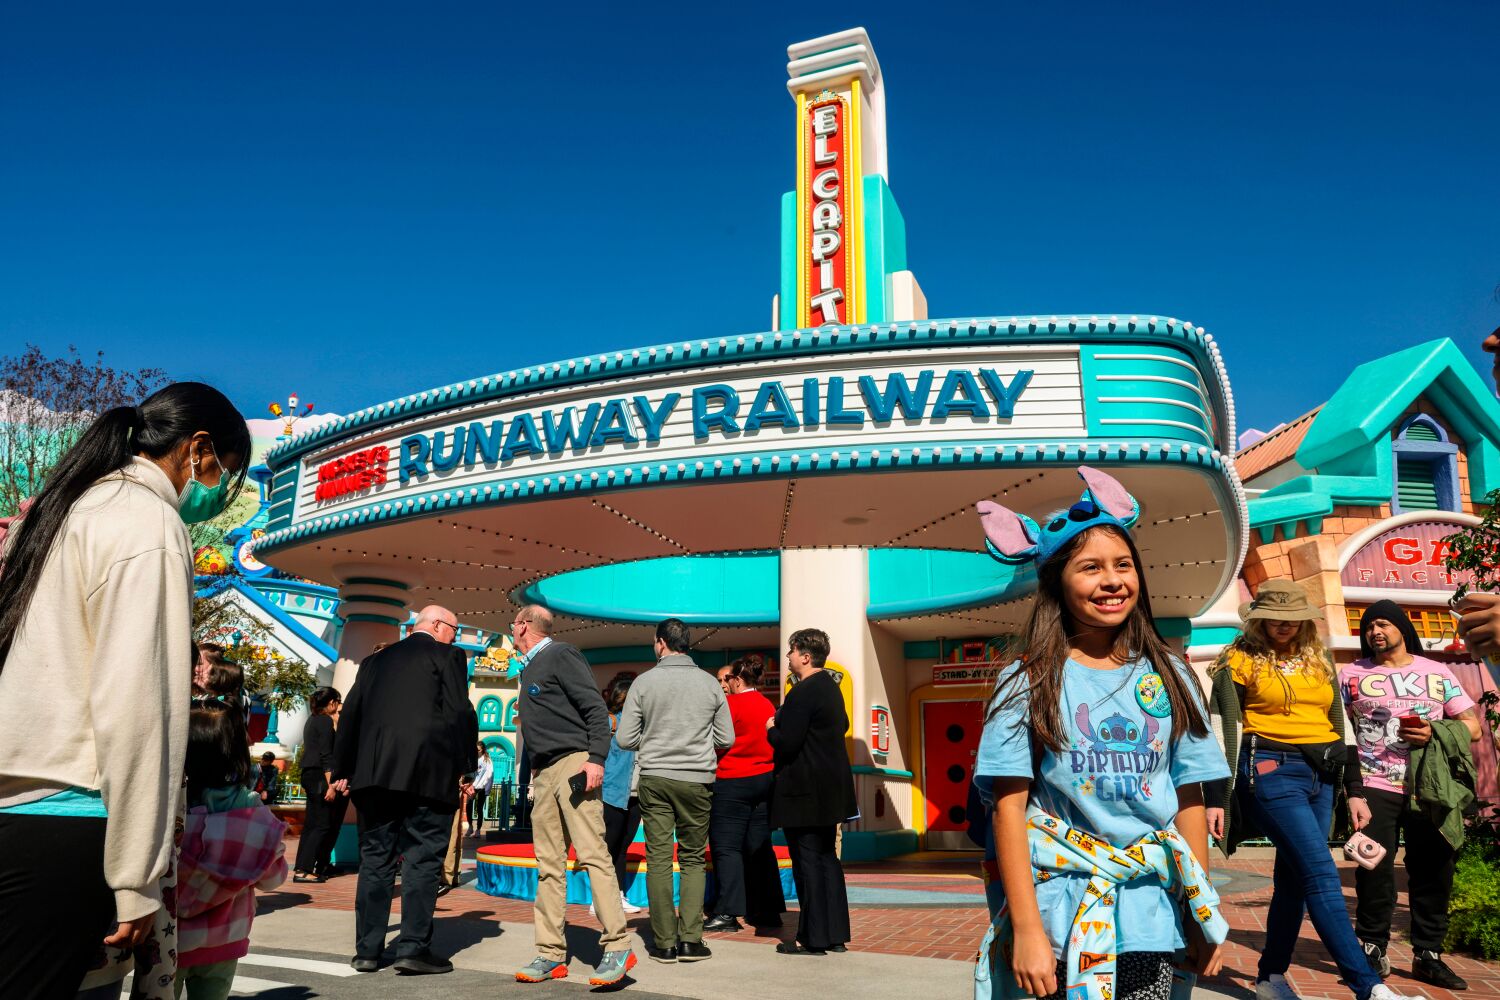 Mickey & Minnie's Runaway Railway uses innovation to deliver old-school Disney